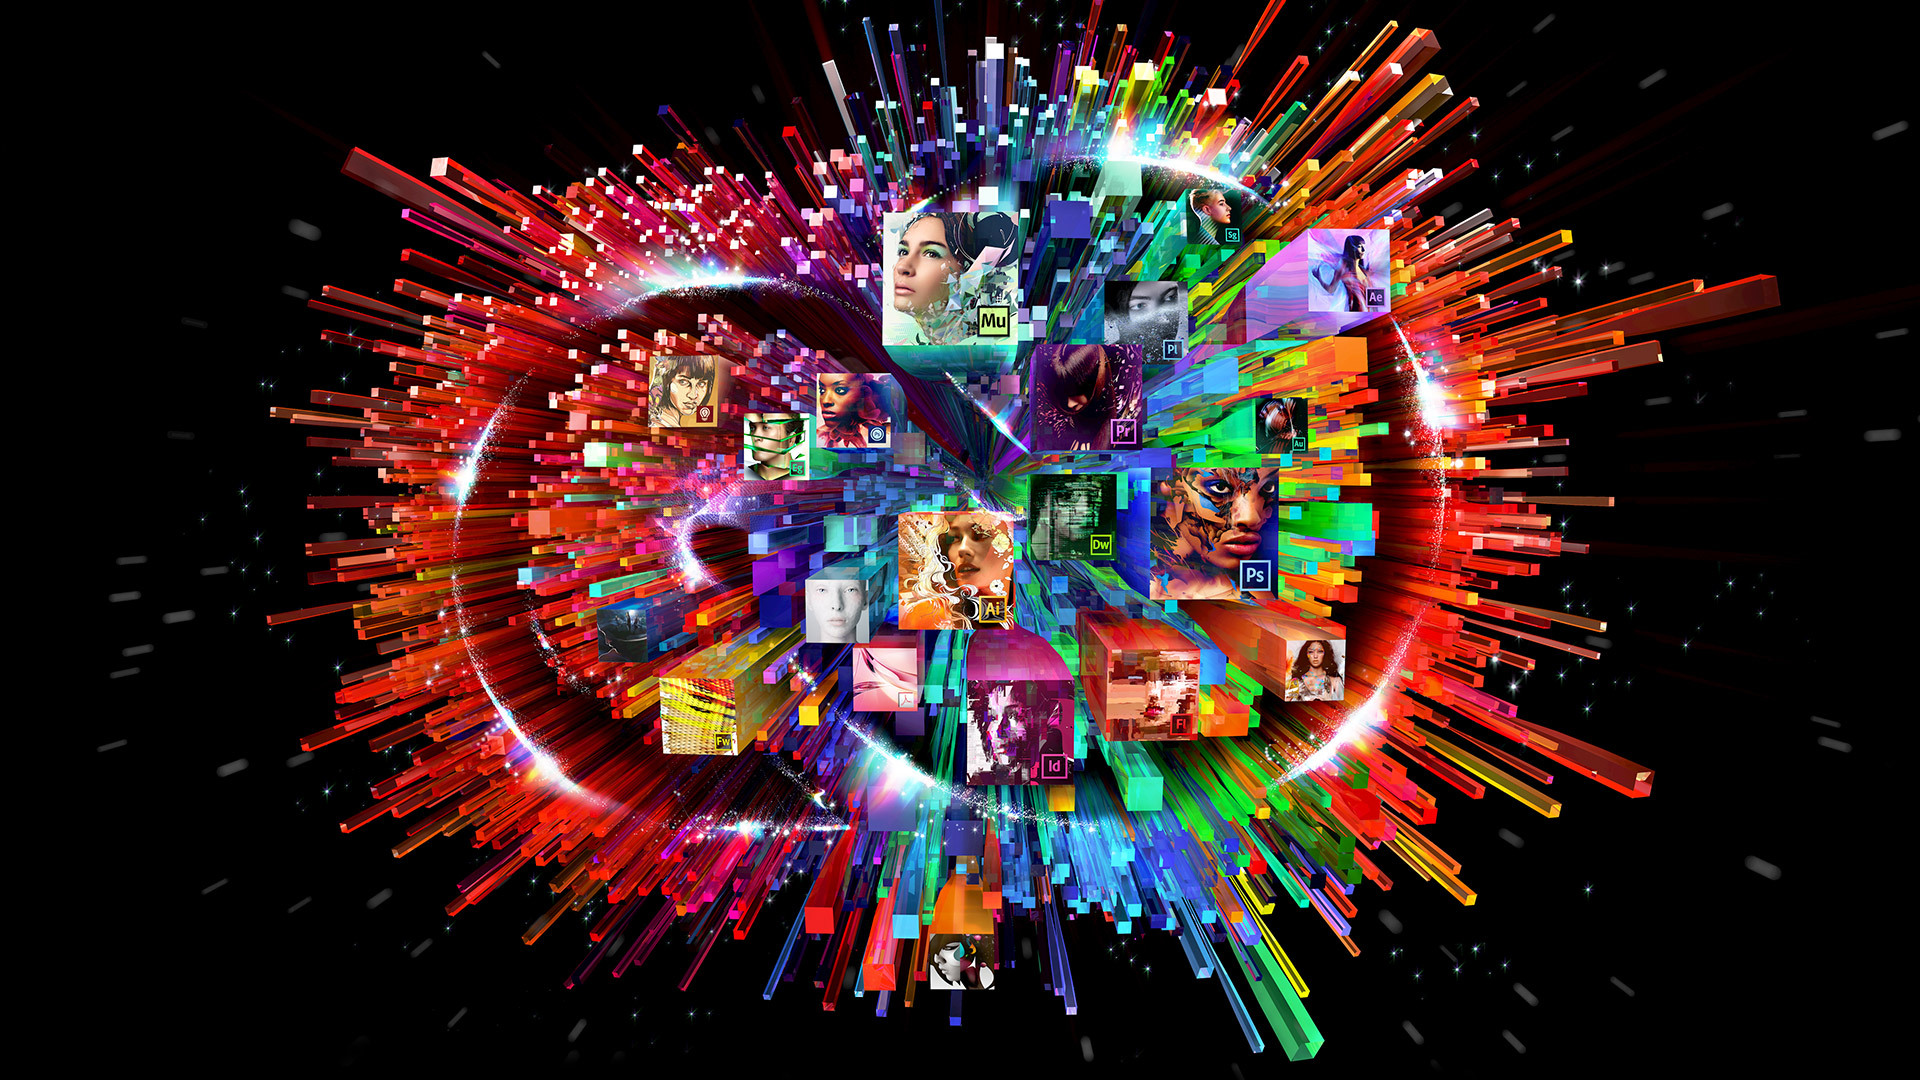 Adobe renews free trials of Creative Cloud 2015 to preview new